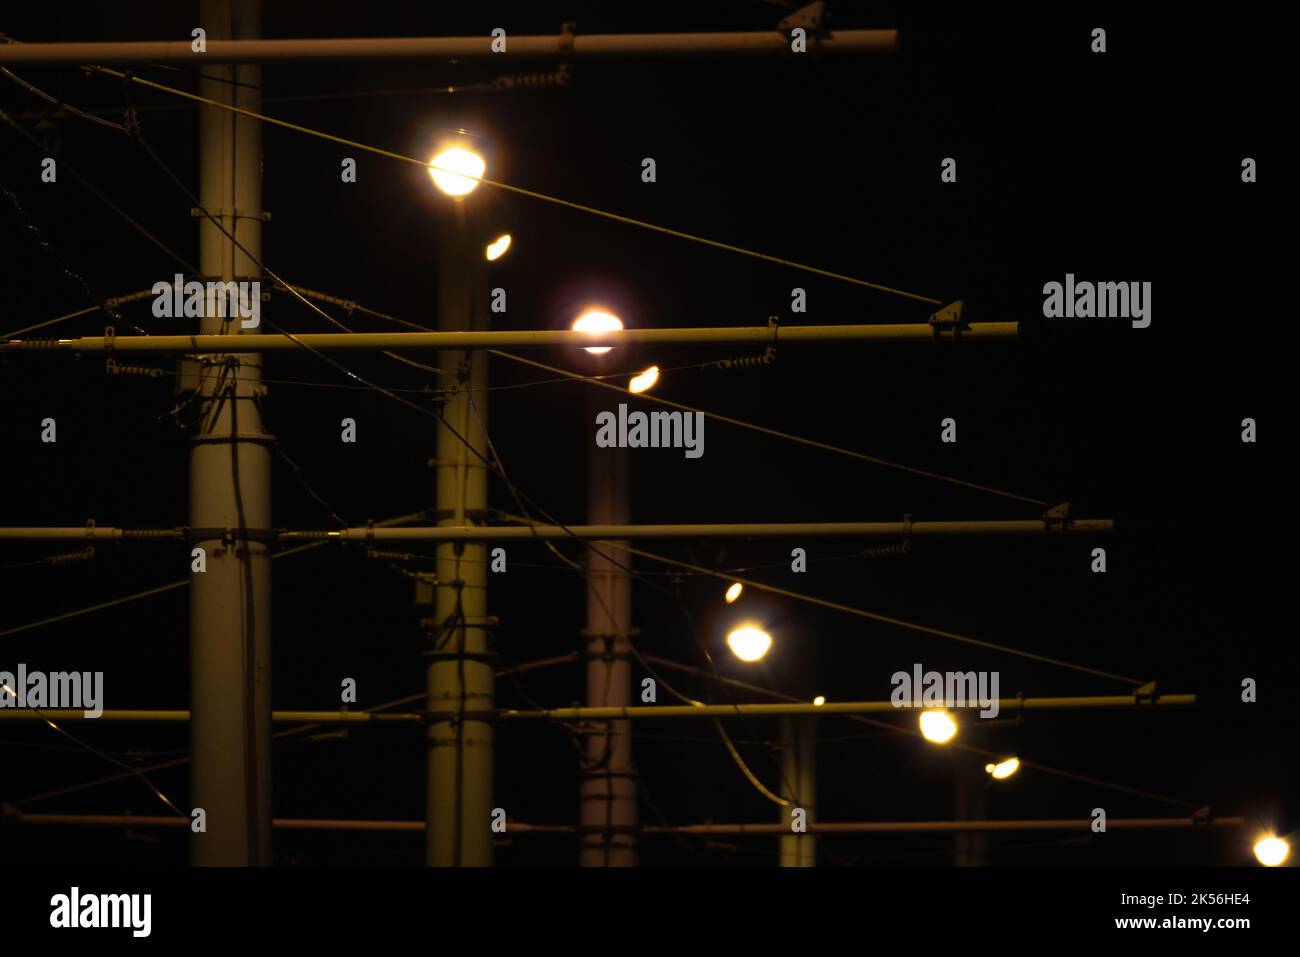 Street lights and tram wires are over dark sky background. Abstract urban night photo Stock Photo